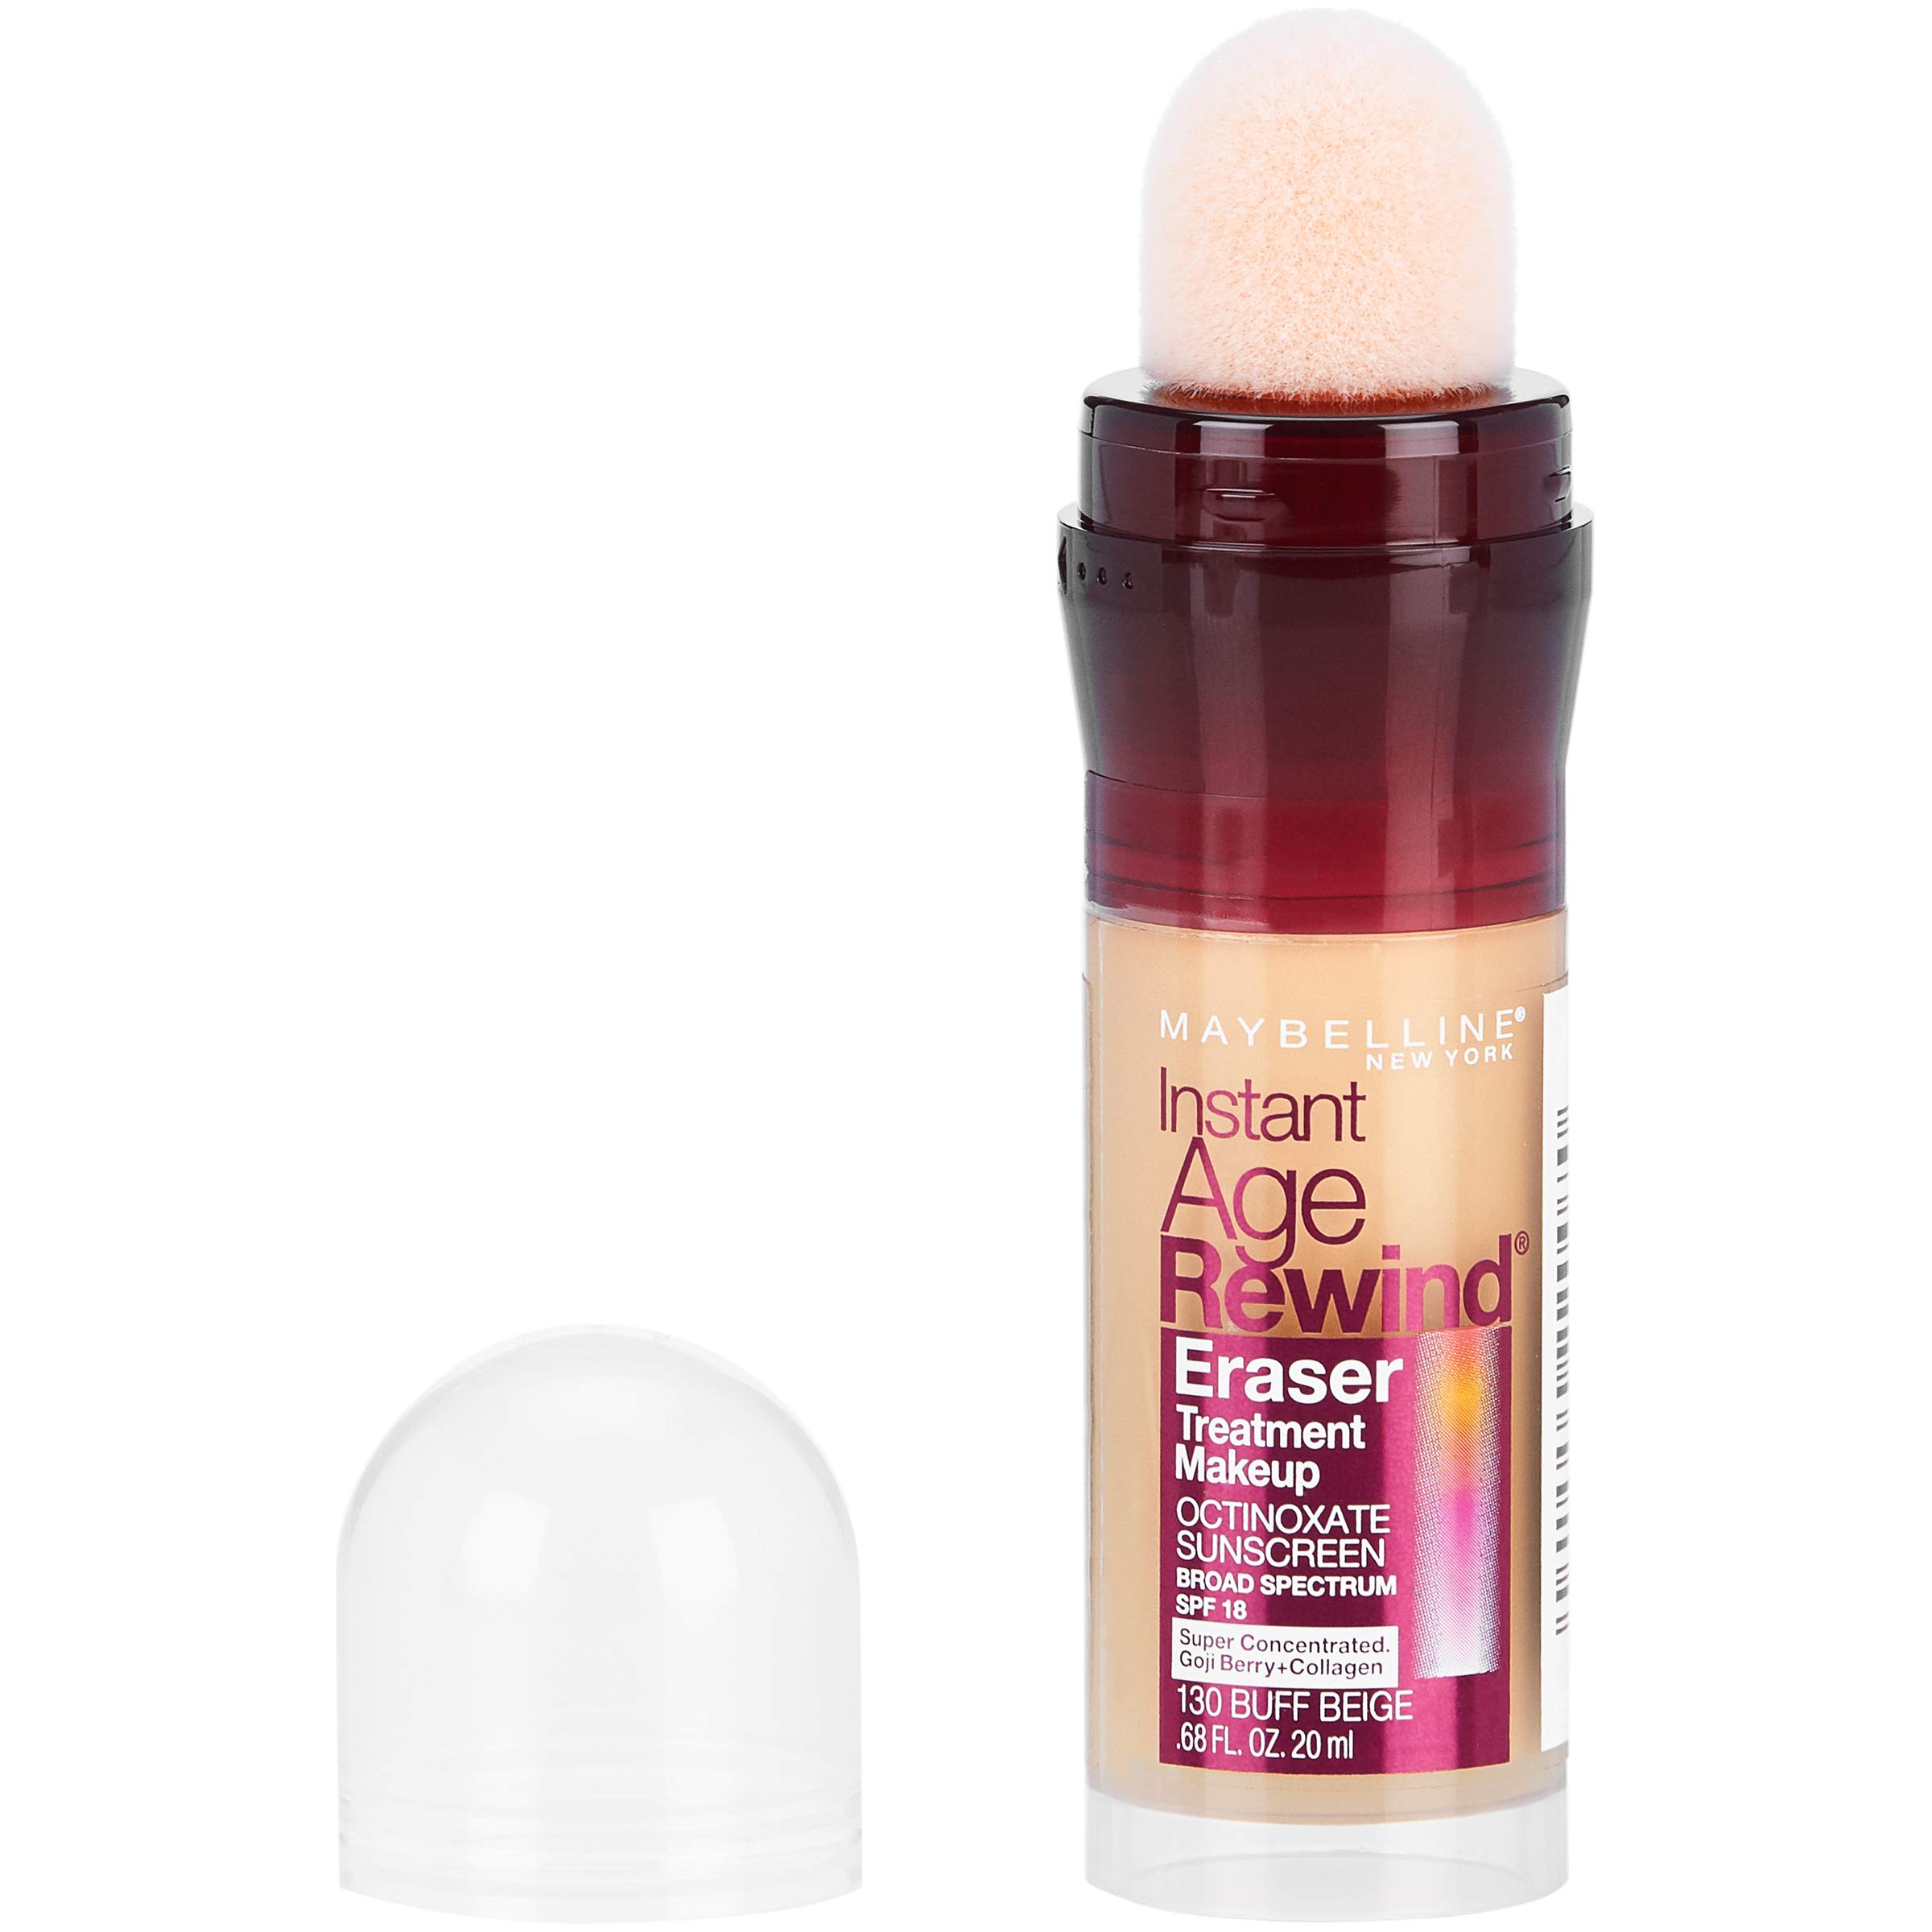 Maybelline New York Instant Age Rewind Eraser Treatment Makeup with SPF 18, Anti Aging Concealer Infused with Goji Berry and Collagen, Buff Beige, 1 Count